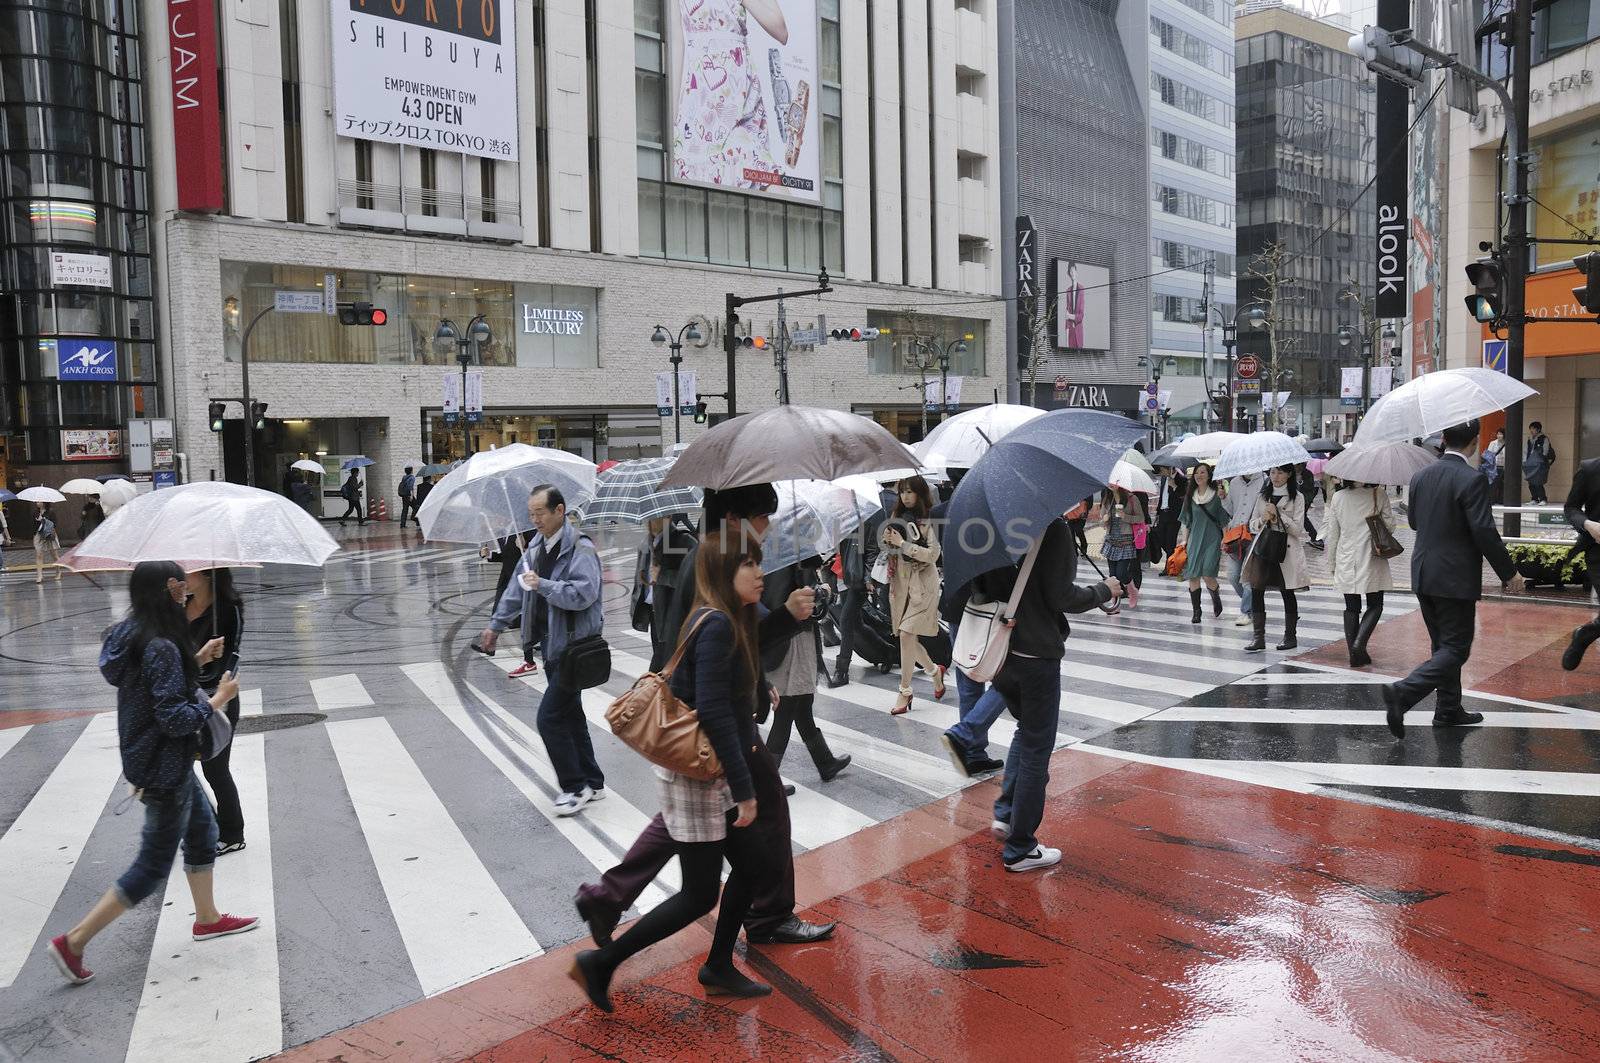 TOKYO, JAPAN -APRIL 23, 2011 : people cross over street in Tokyo Shibuya area under rain. Shibuya district is very famous for it's fashion shops and crowds of young people.